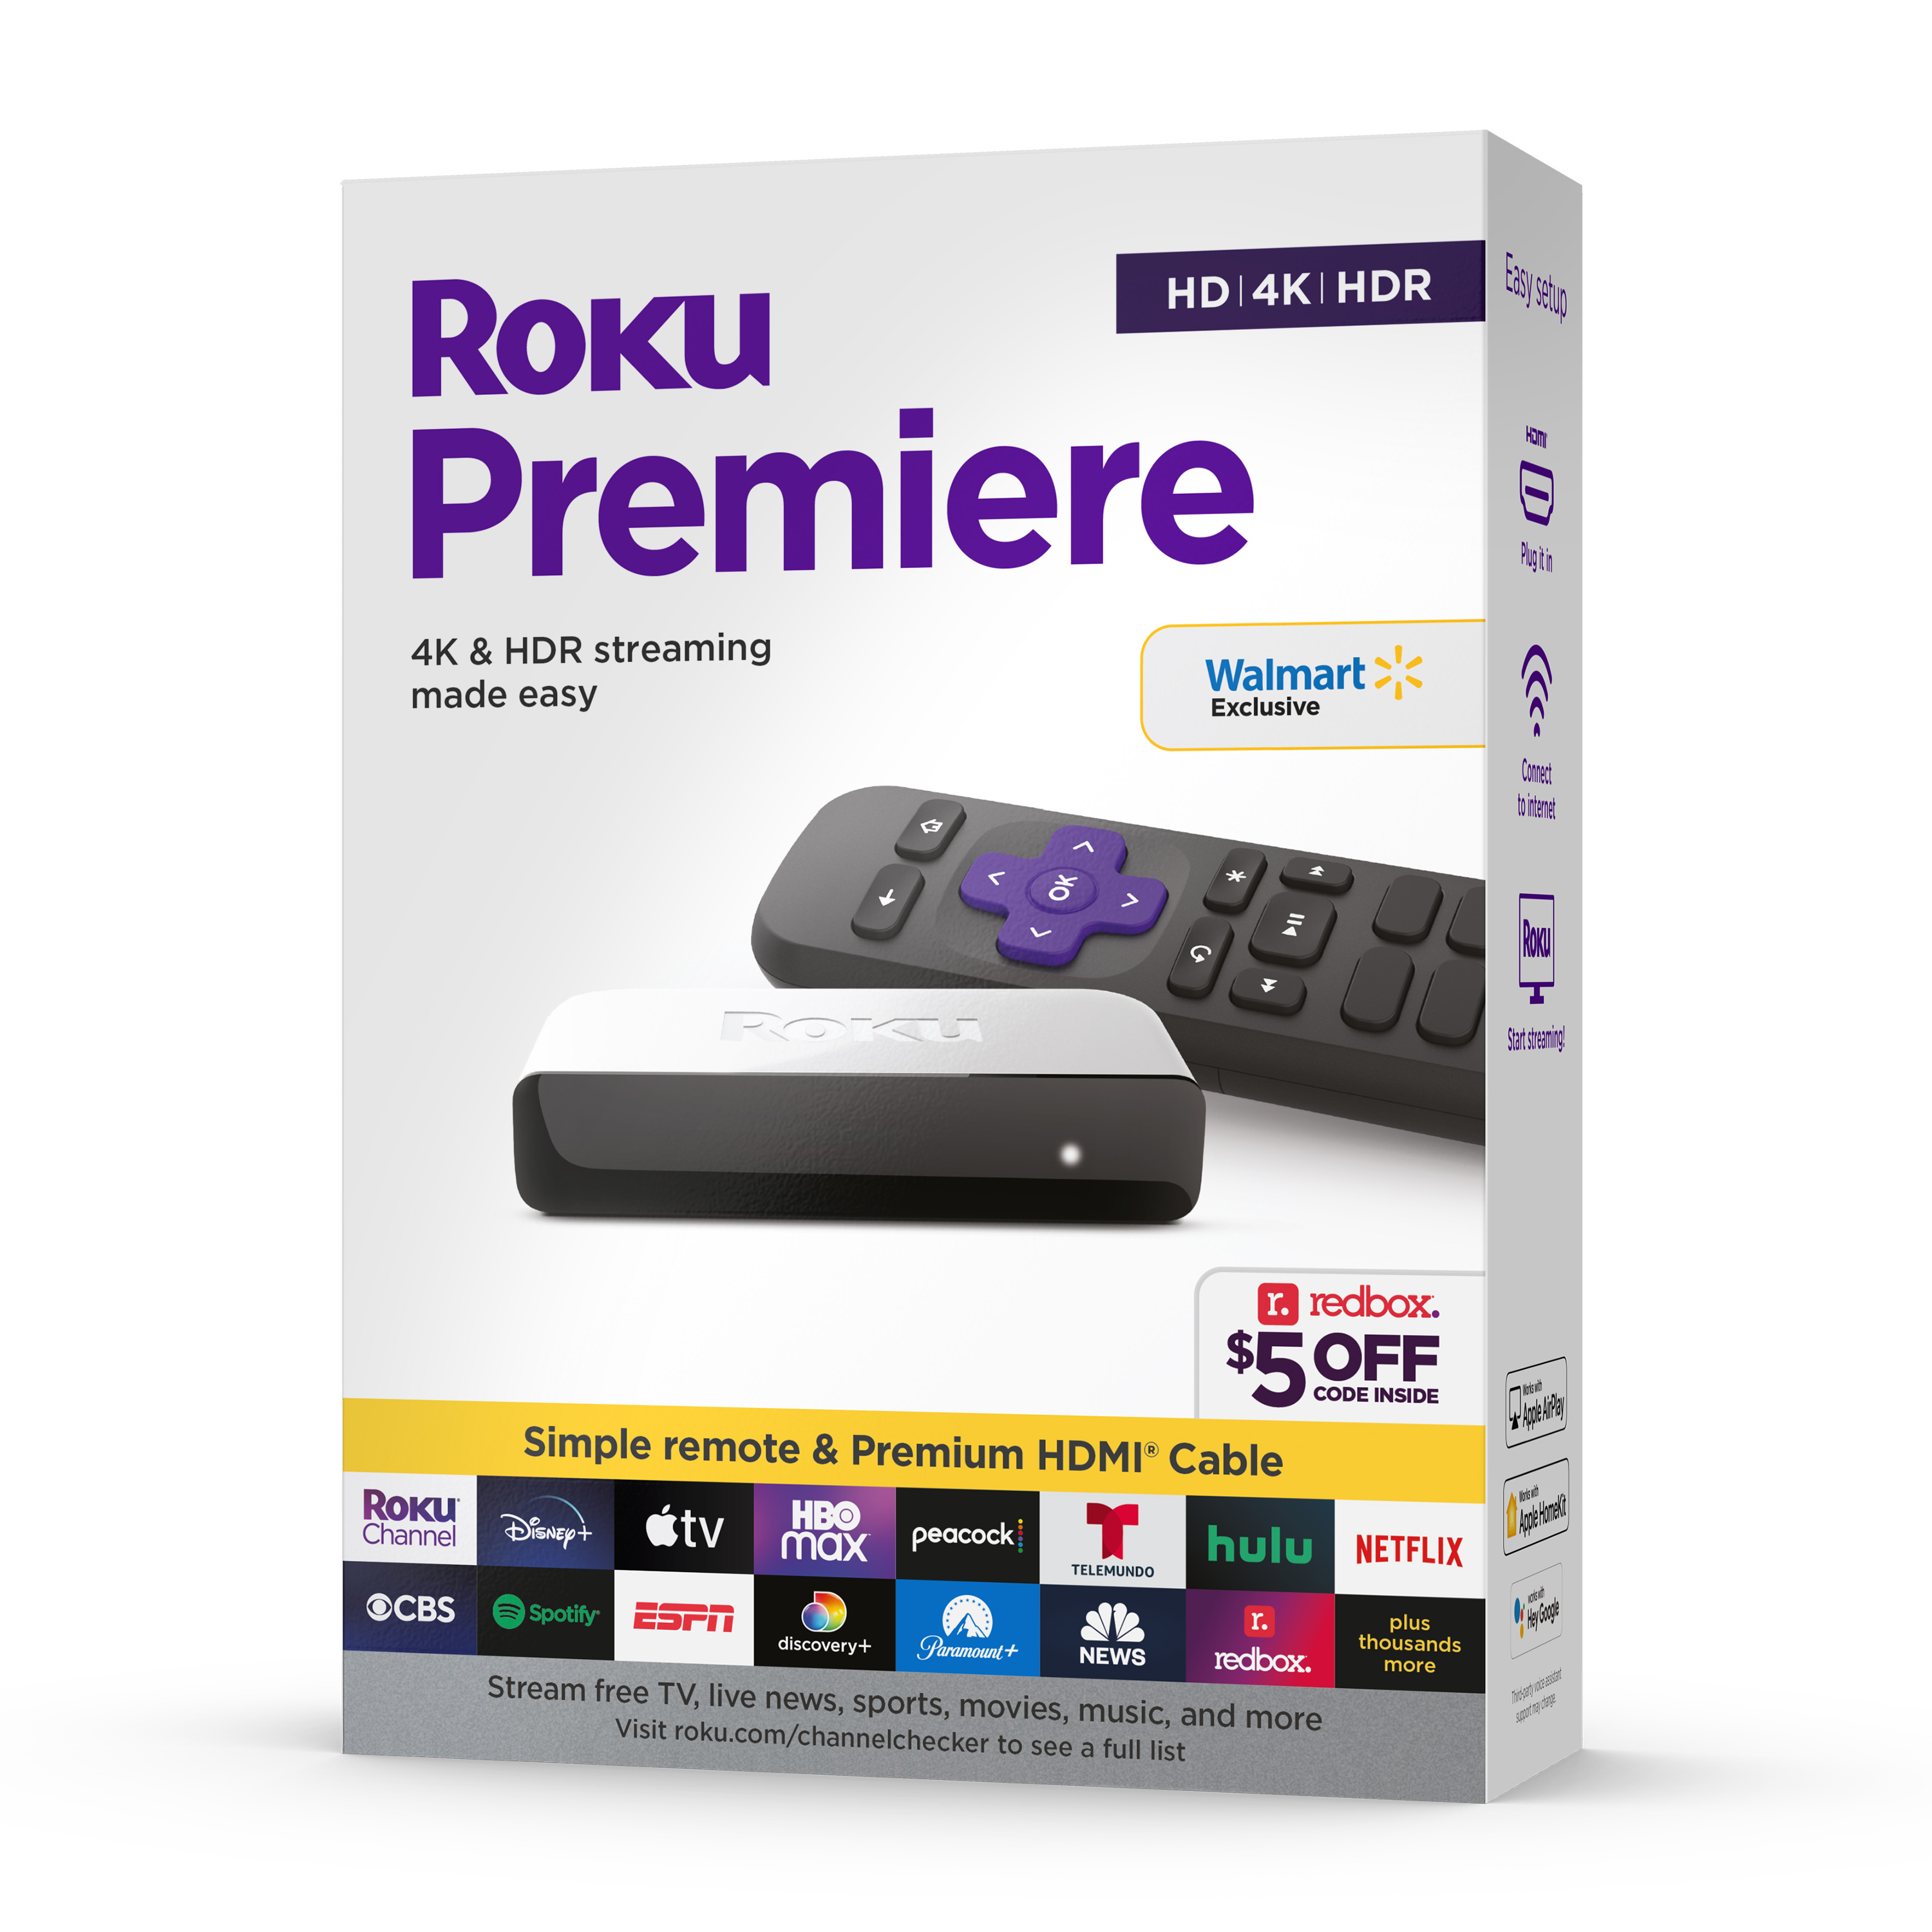 Roku Premiere | 4K/HDR Streaming Media Player with Premium High Speed HDMI Cable and Simple Remote - image 1 of 10